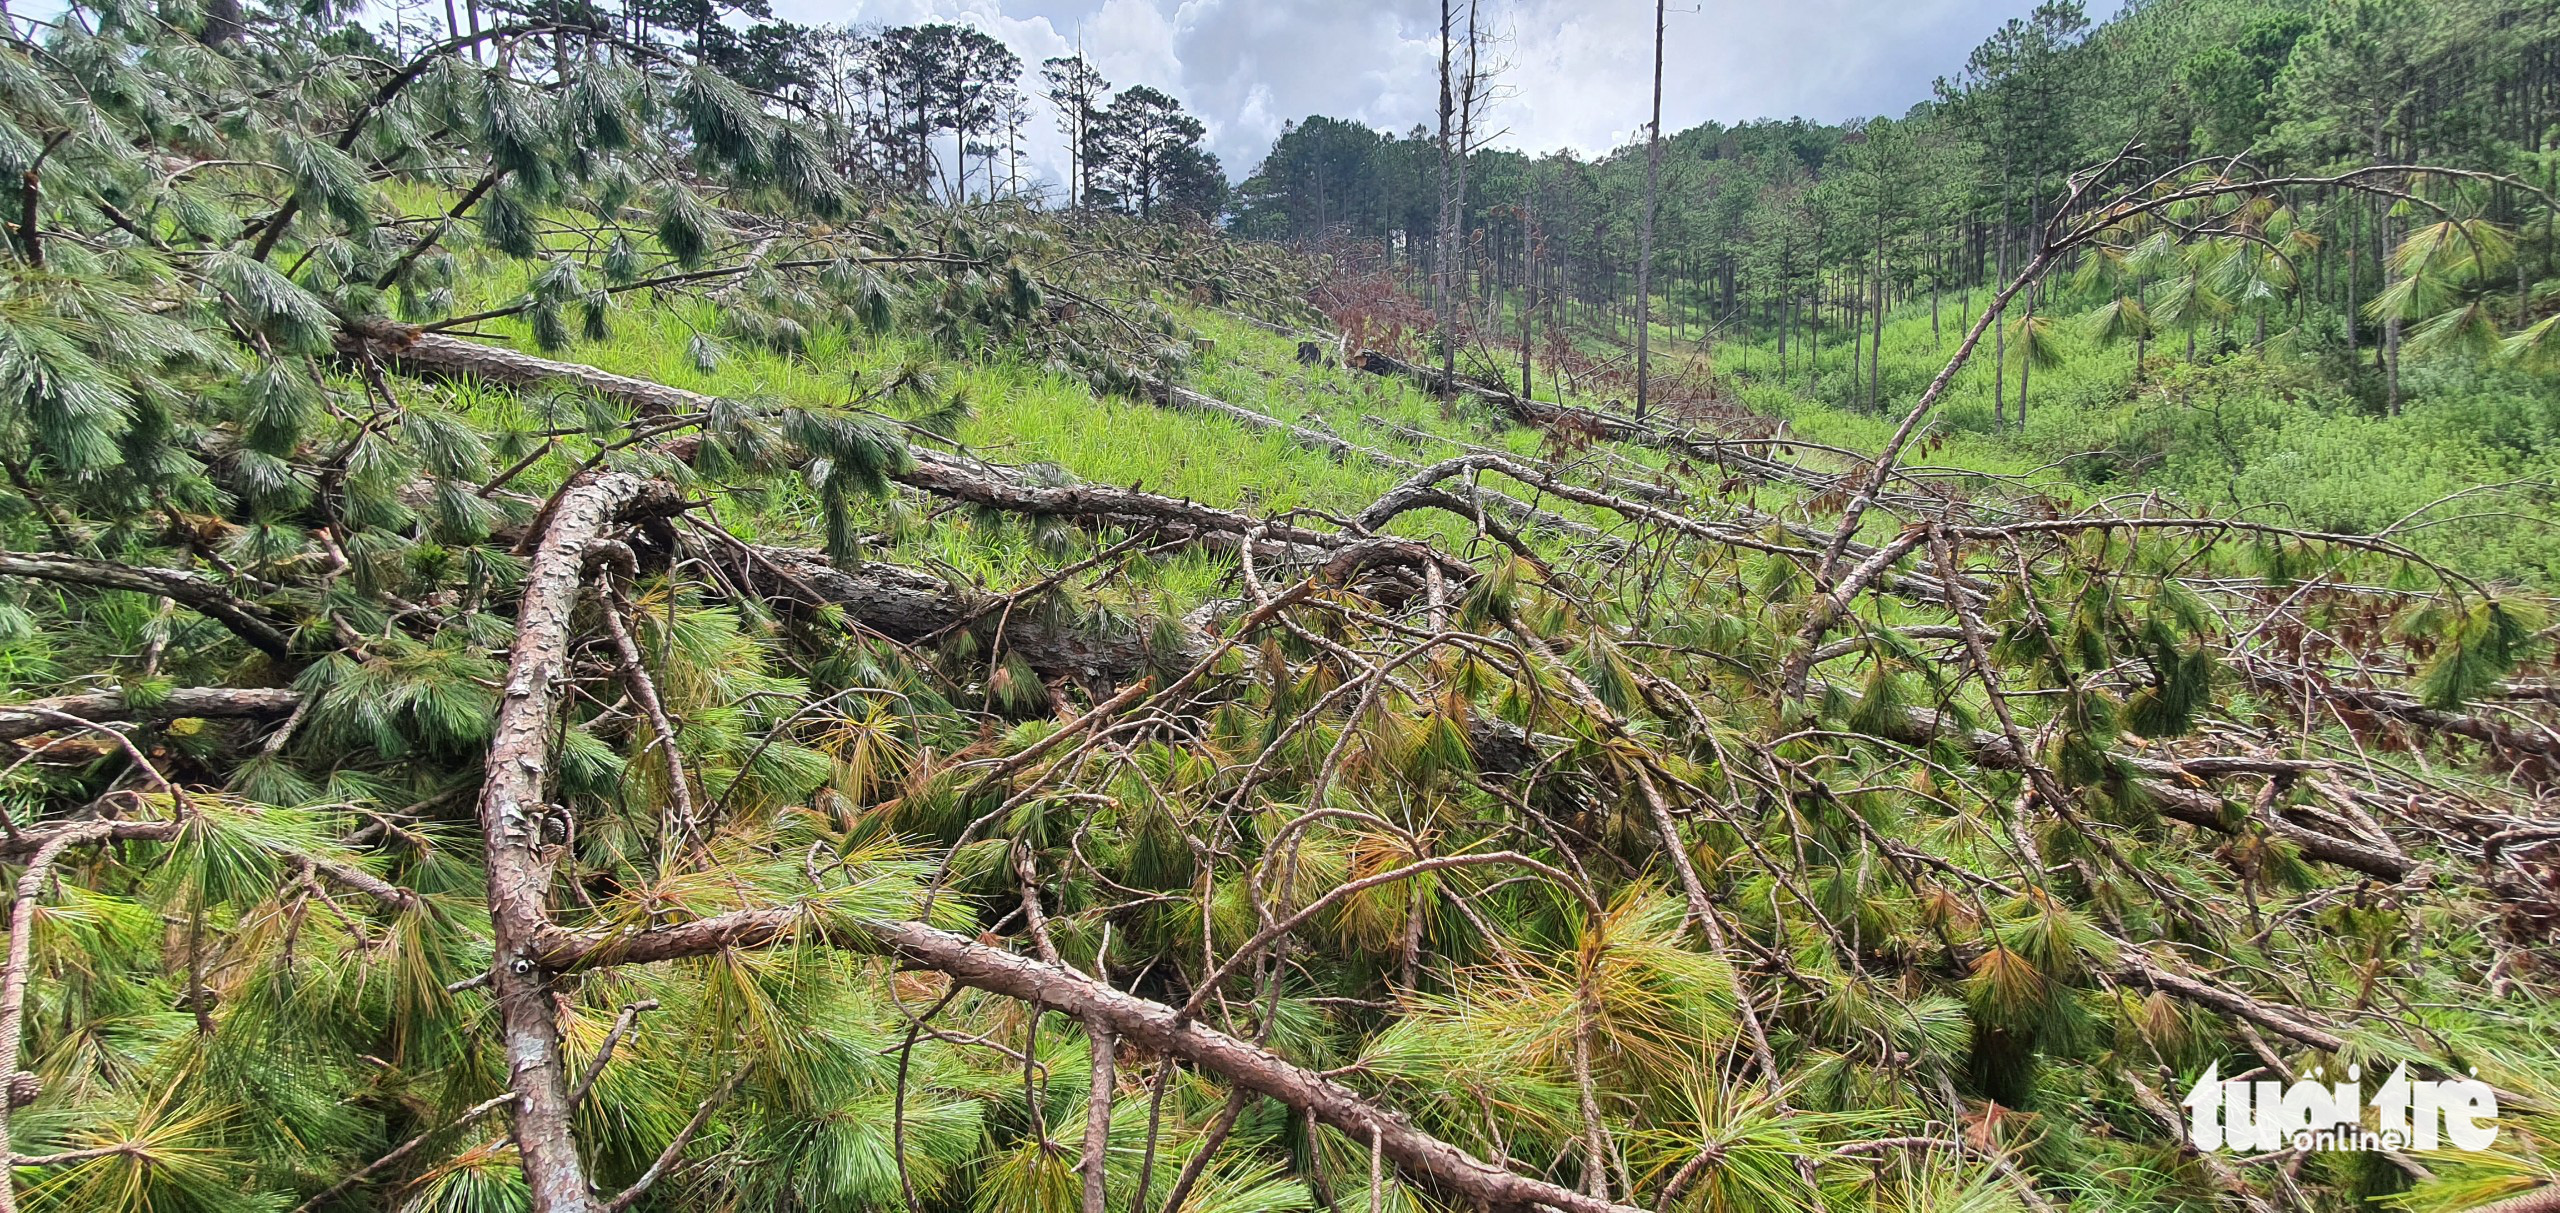 Pine trees are chopped down at the Lam Vien protection forest in Da Lat City, Lam Dong Province, Vietnam in this photo taken on May 17, 2022. Photo: M. V. / Tuoi Tre